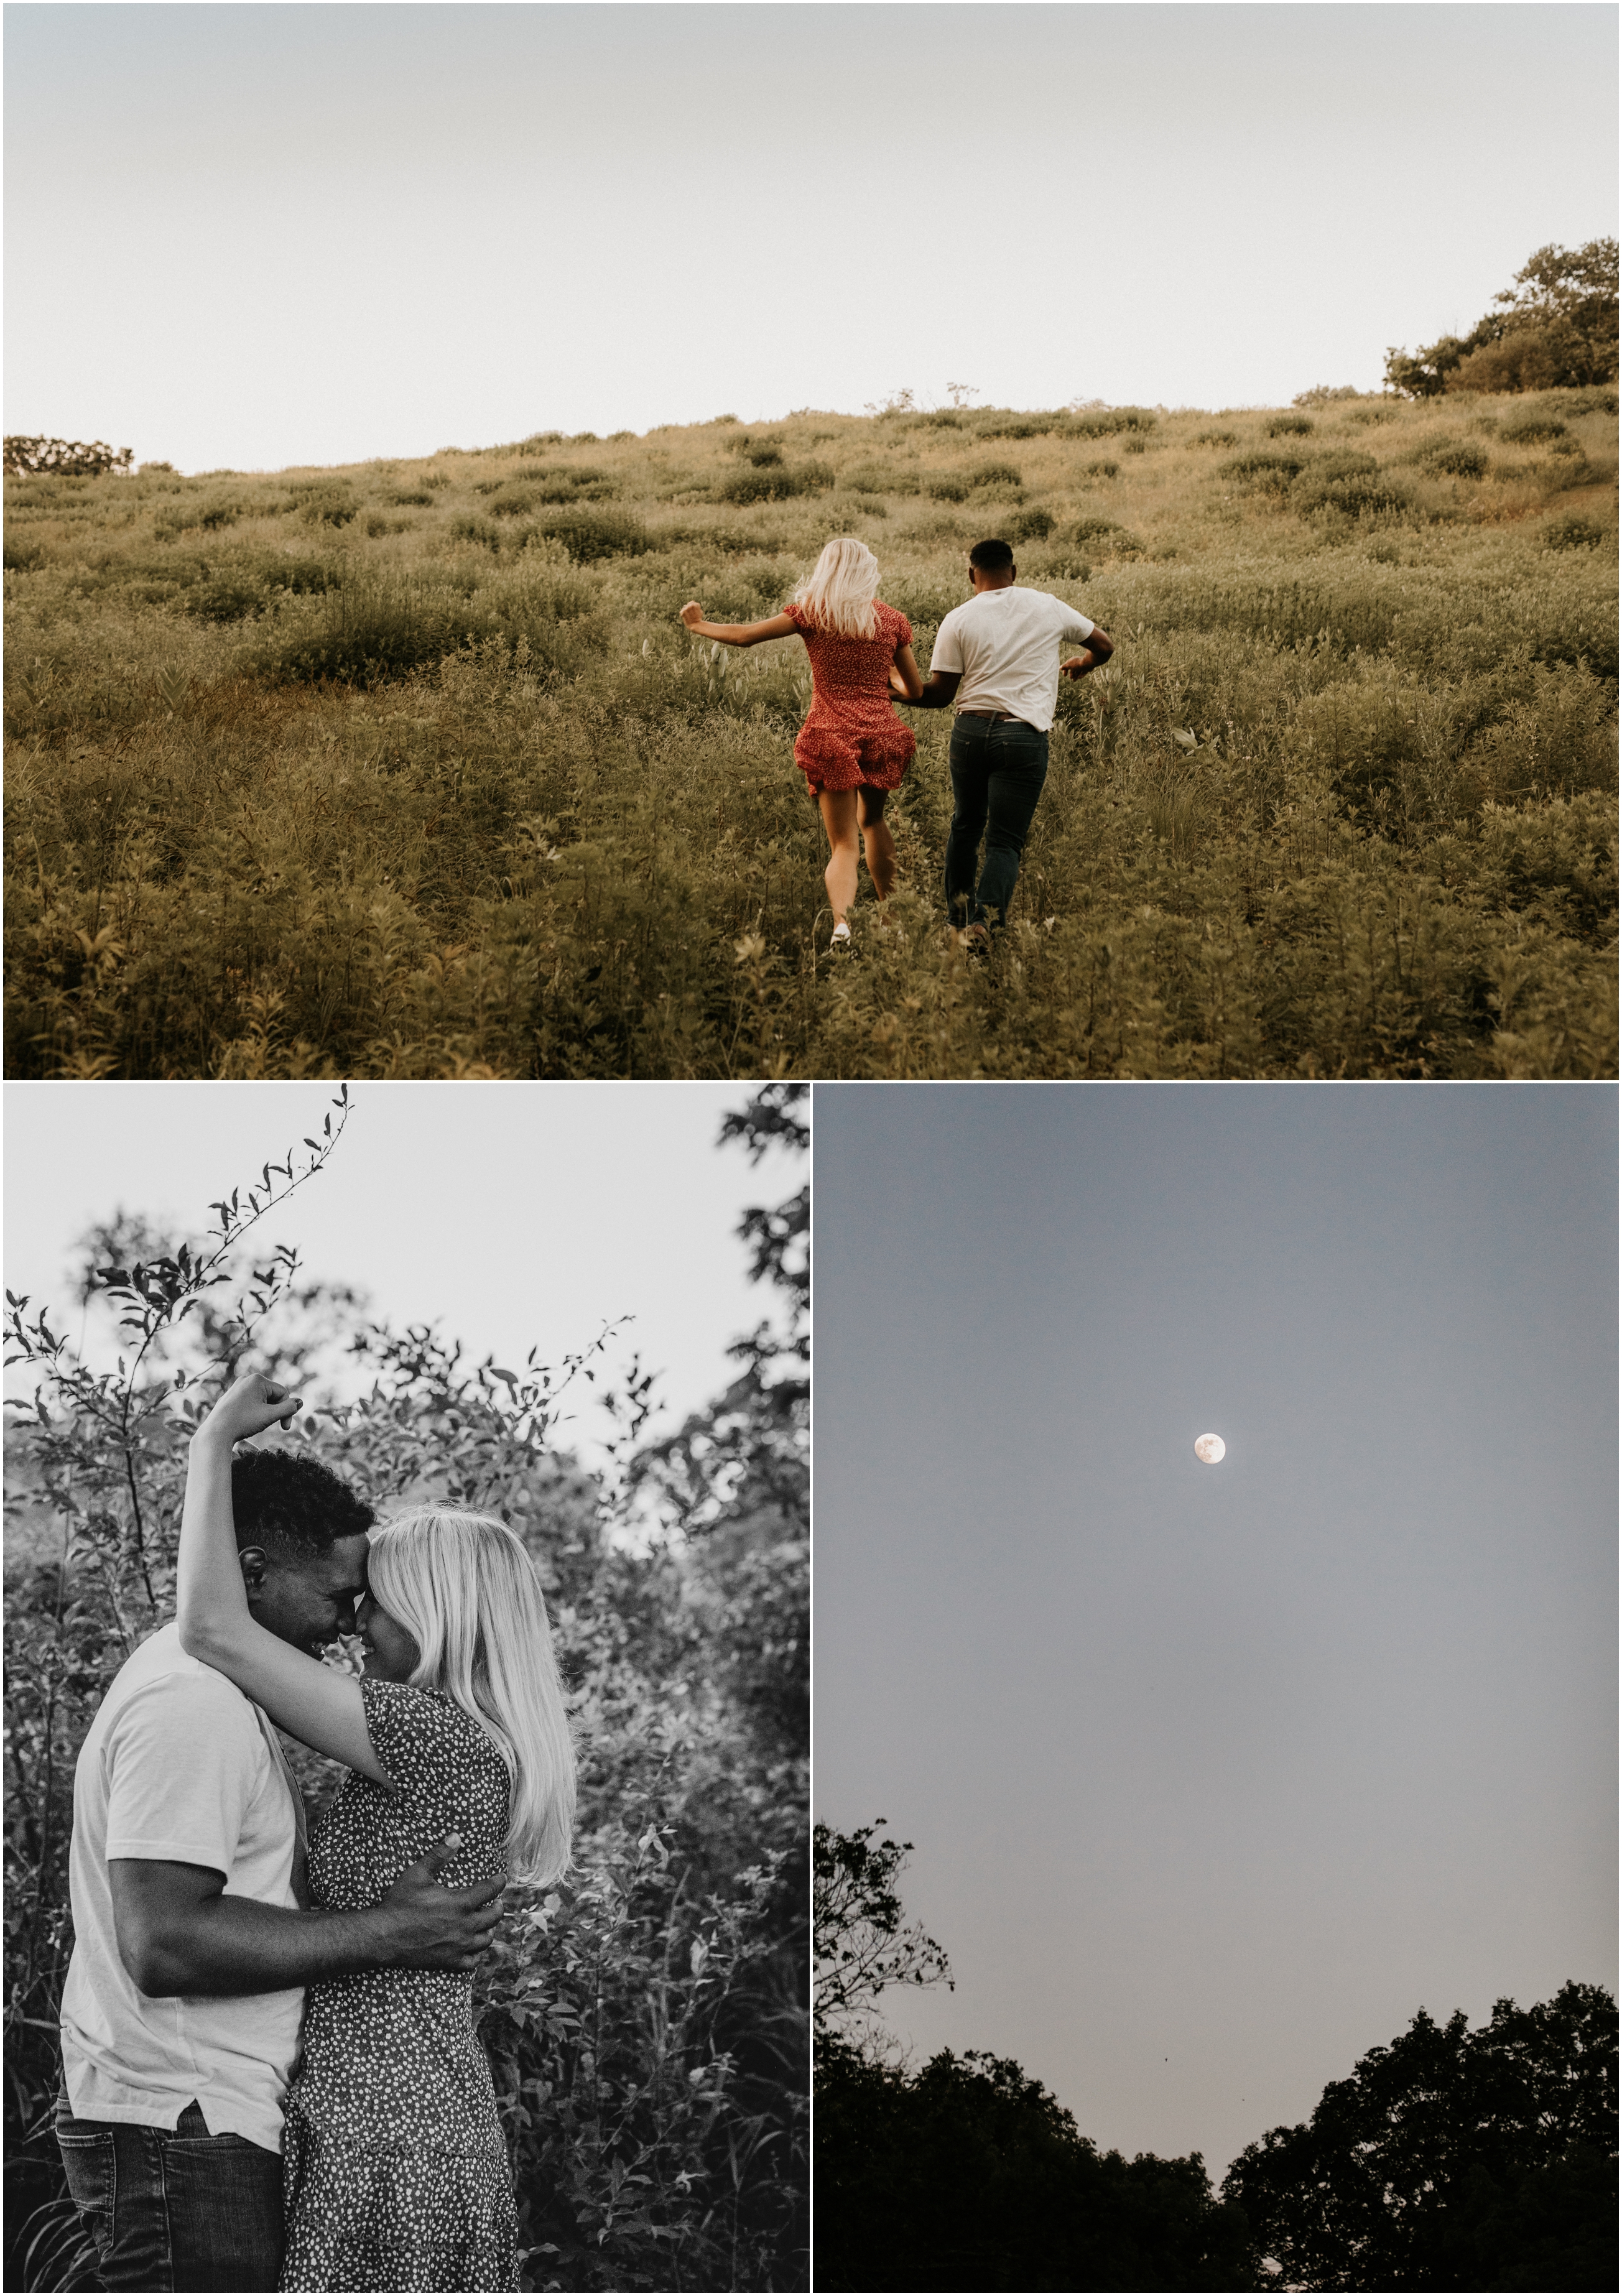 couple running away in open field at sunset, moon in sky